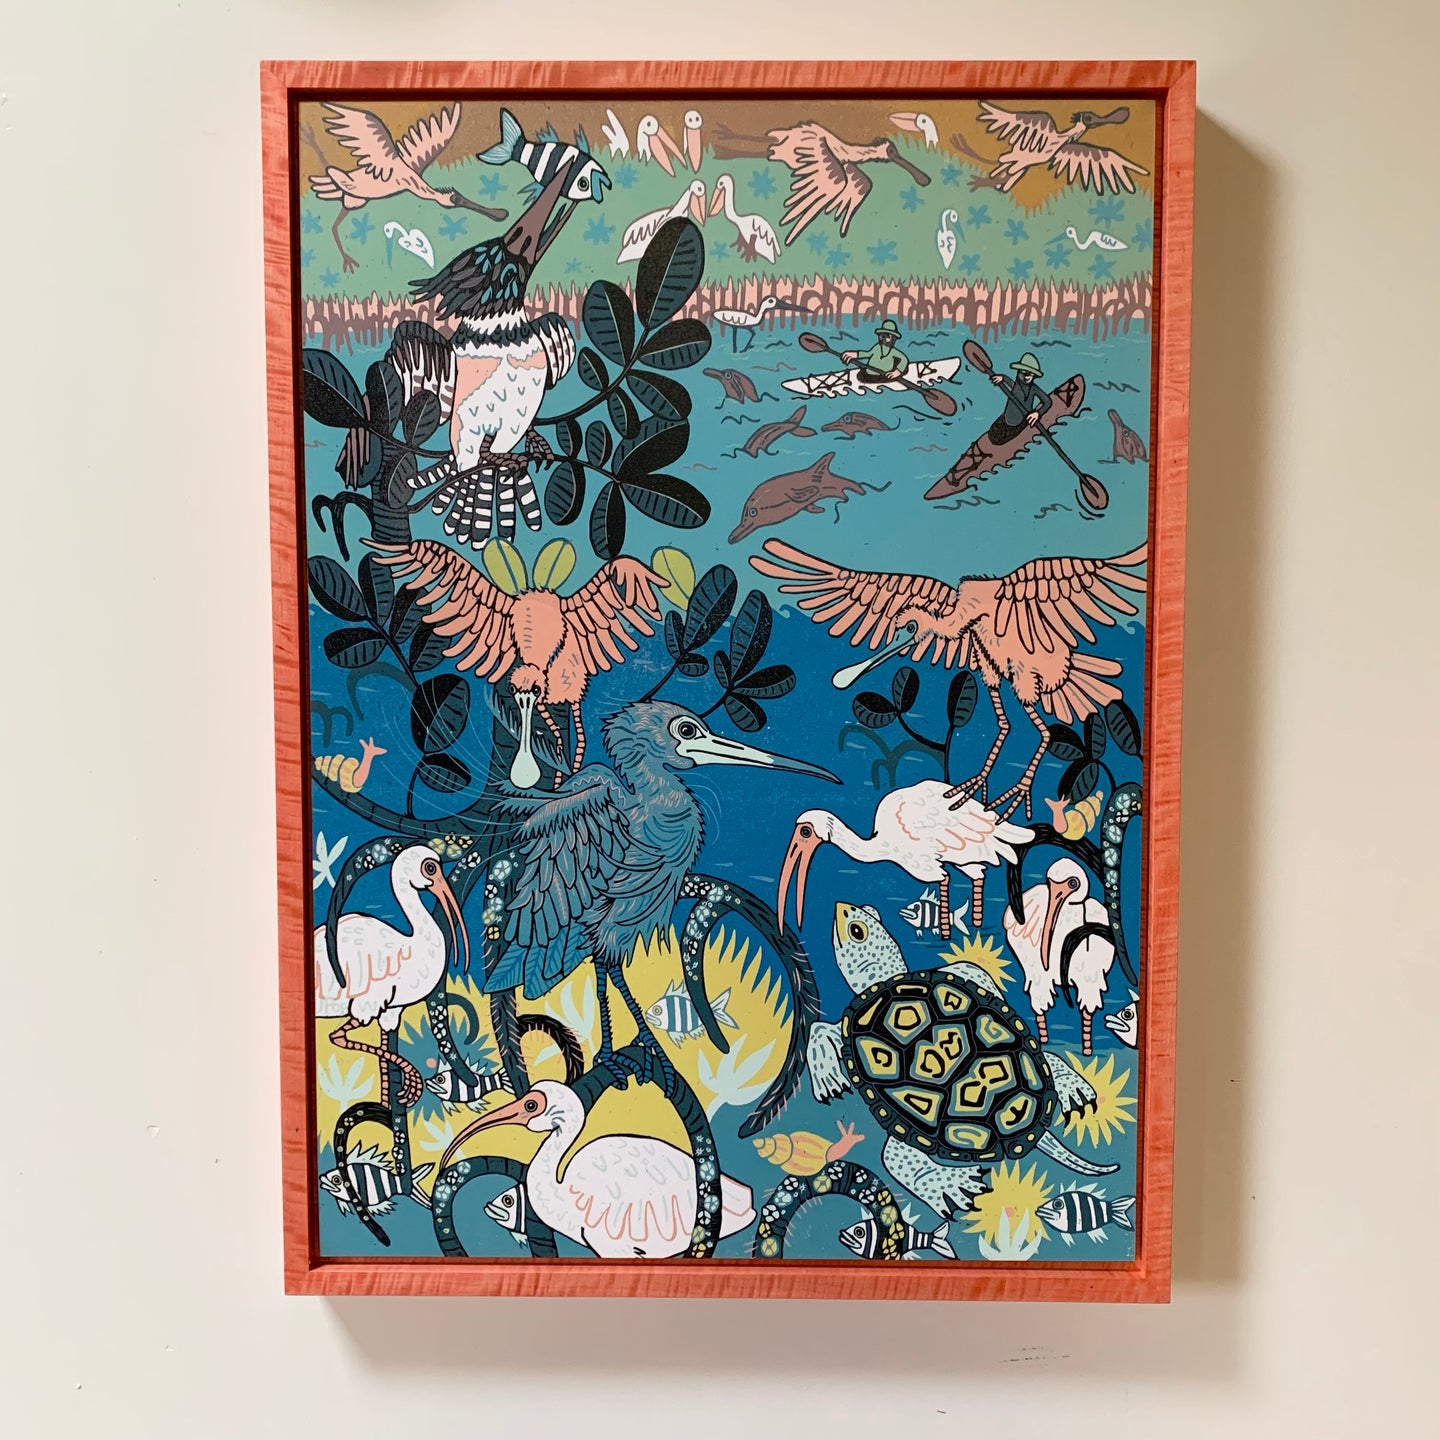 Please allow 8 weeks for delivery—Mangrove Homestead woodcut framed in pink